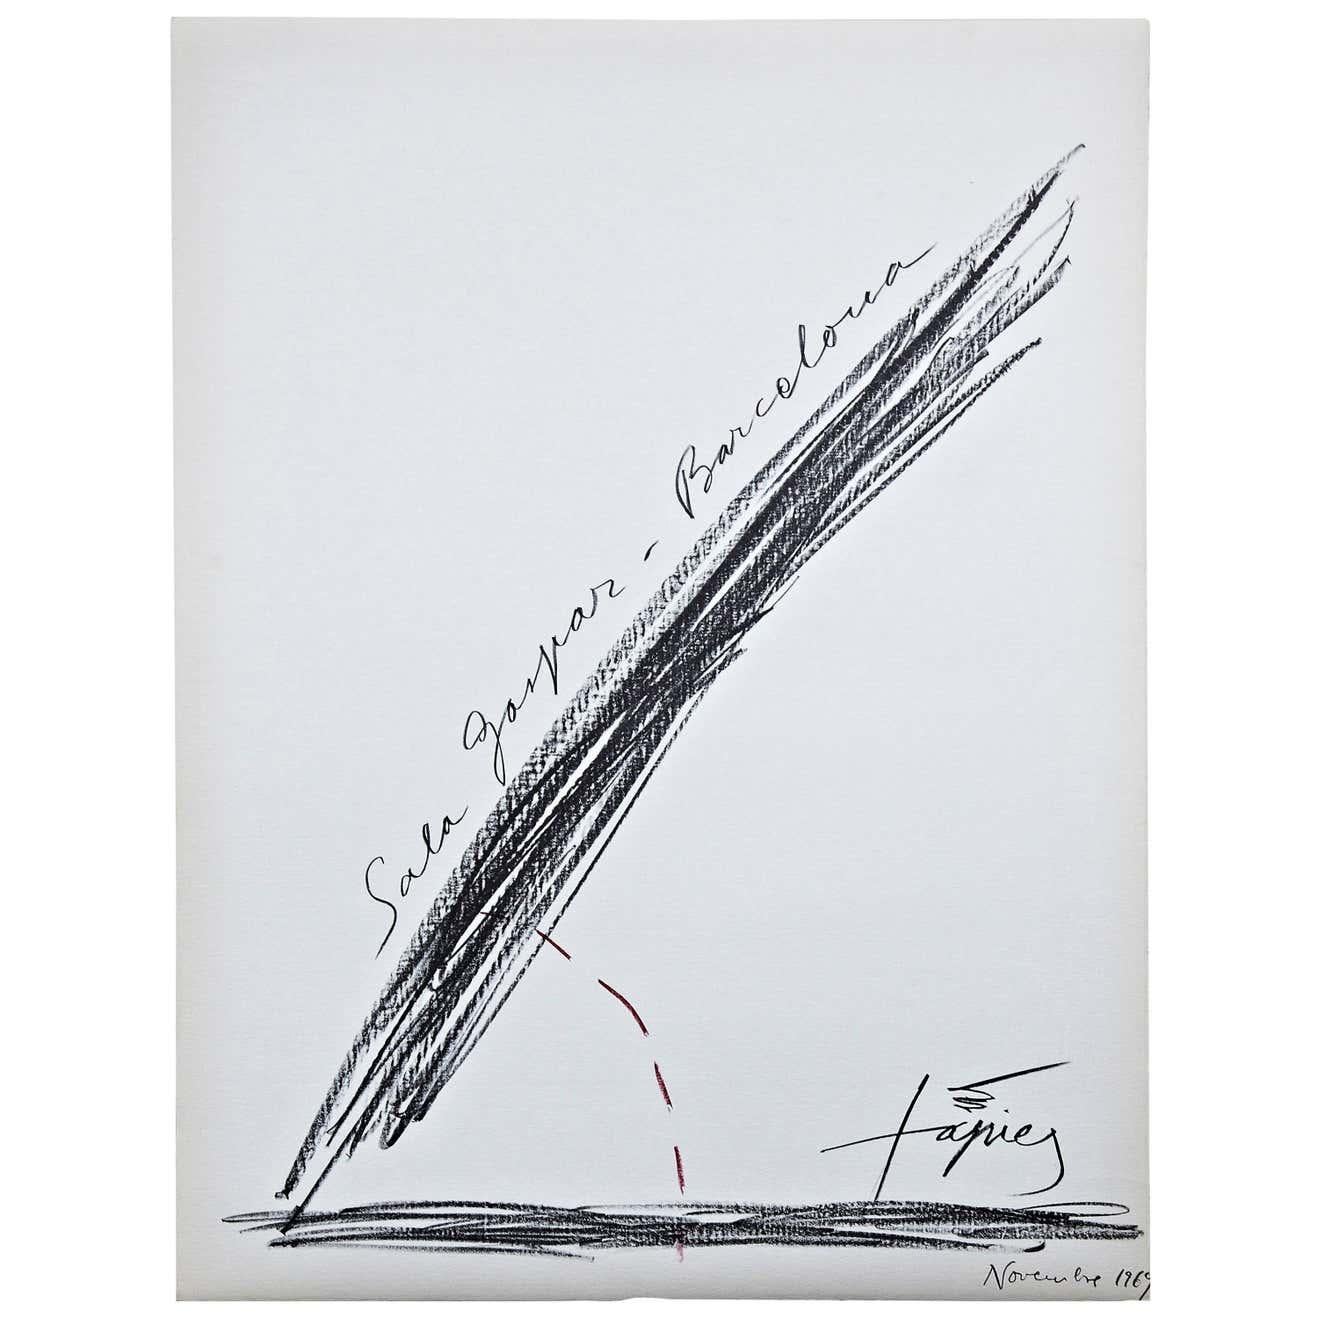 Spanish Antoni Tàpies Abstract Art Lithograph, Exibition, 1969 For Sale